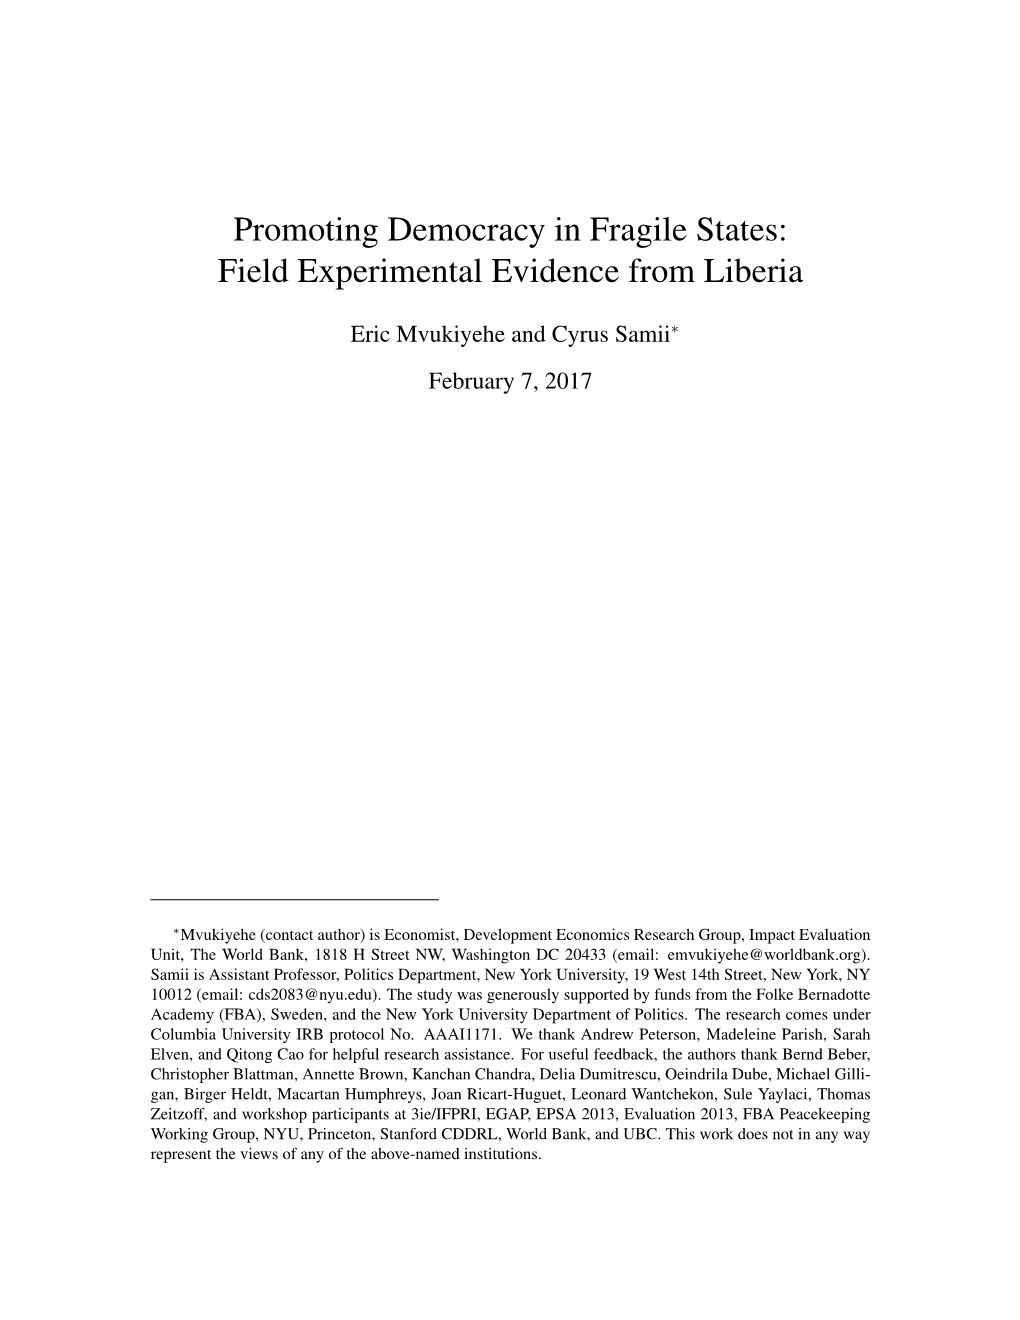 Promoting Democracy in Fragile States: Field Experimental Evidence from Liberia